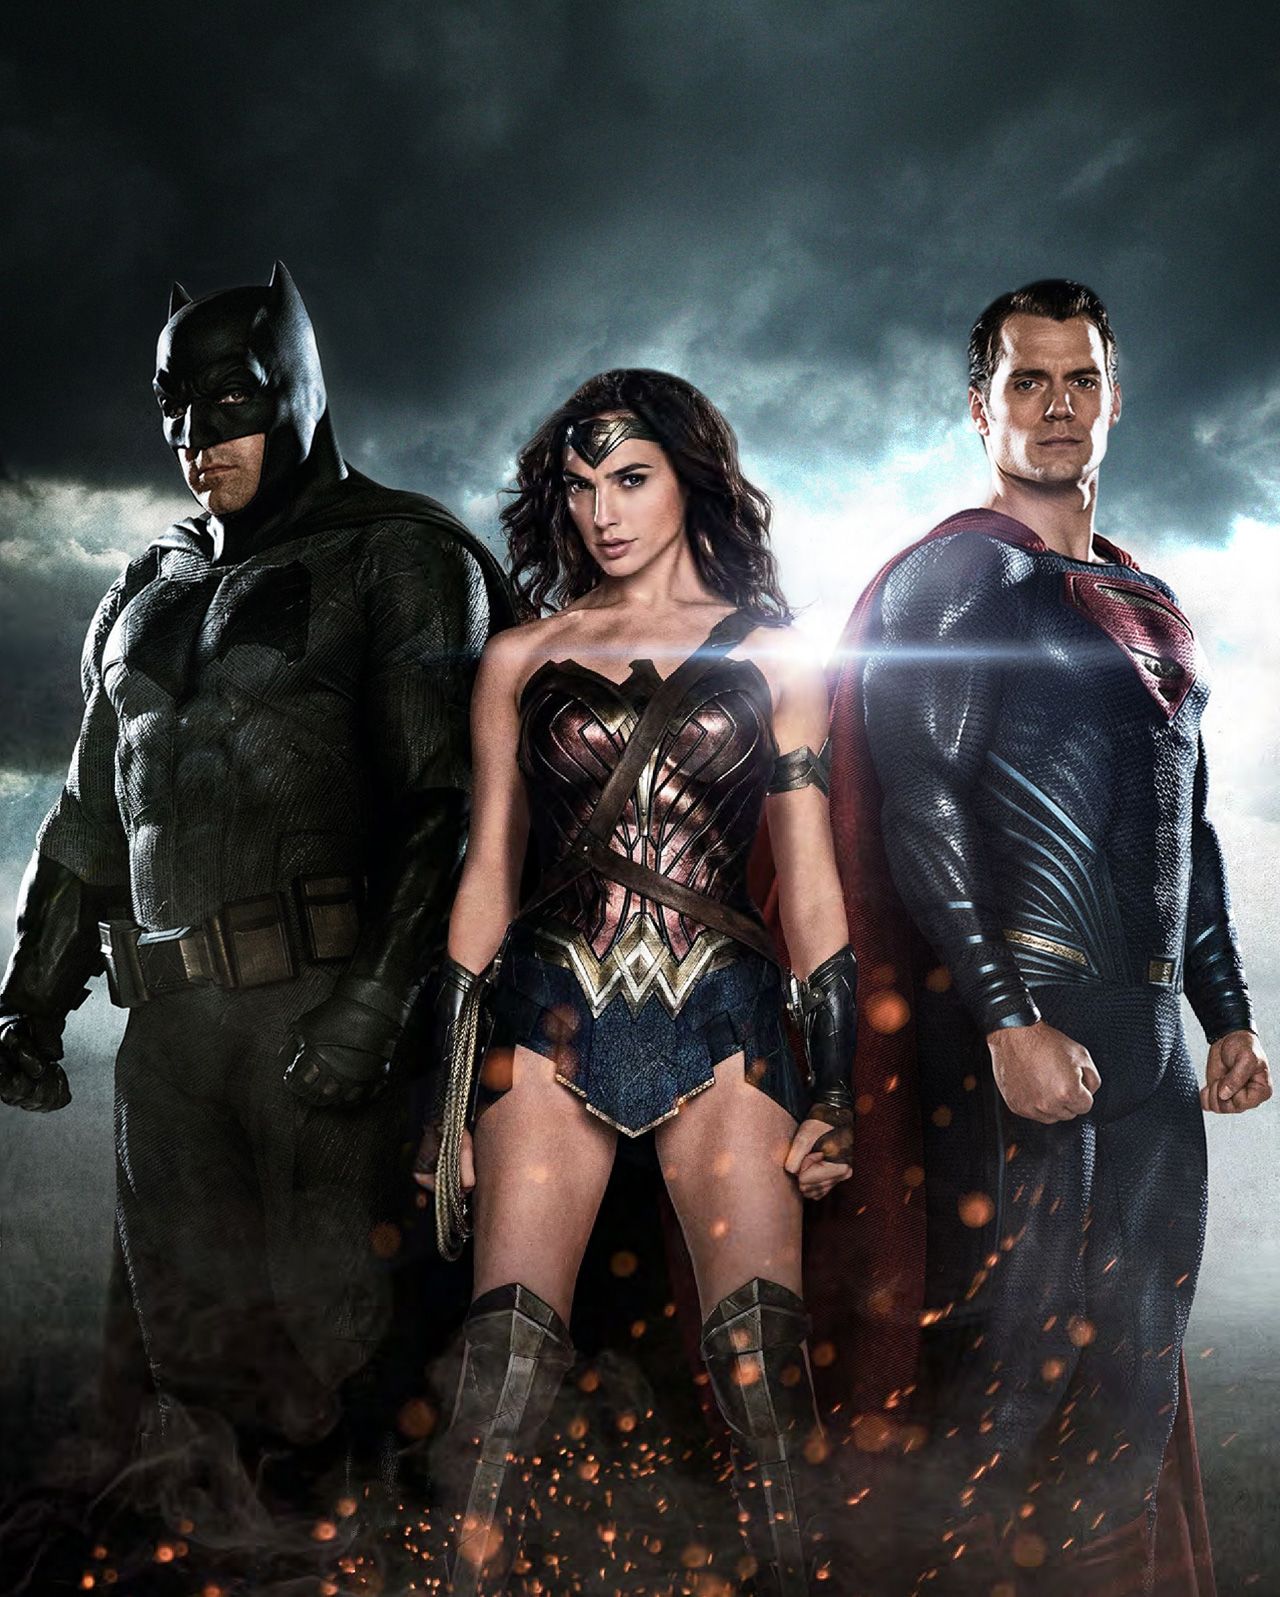 There’s a lot of movie that’s not in the trailer: Zack Snyder On Batman V Superman